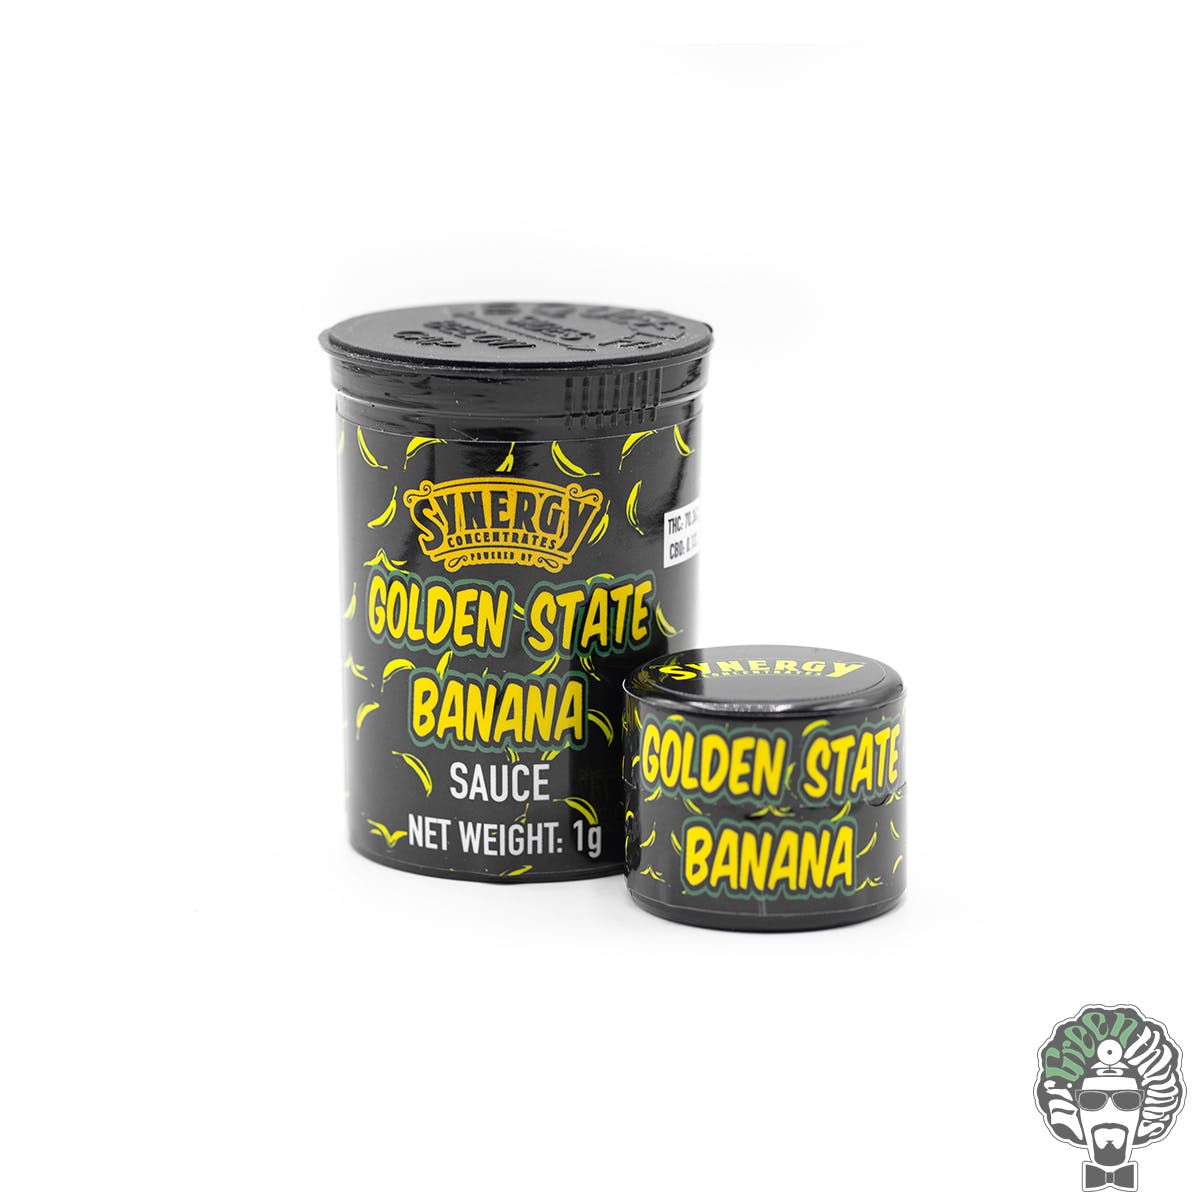 Golden State Banana Sauce By Synergy Concentrates